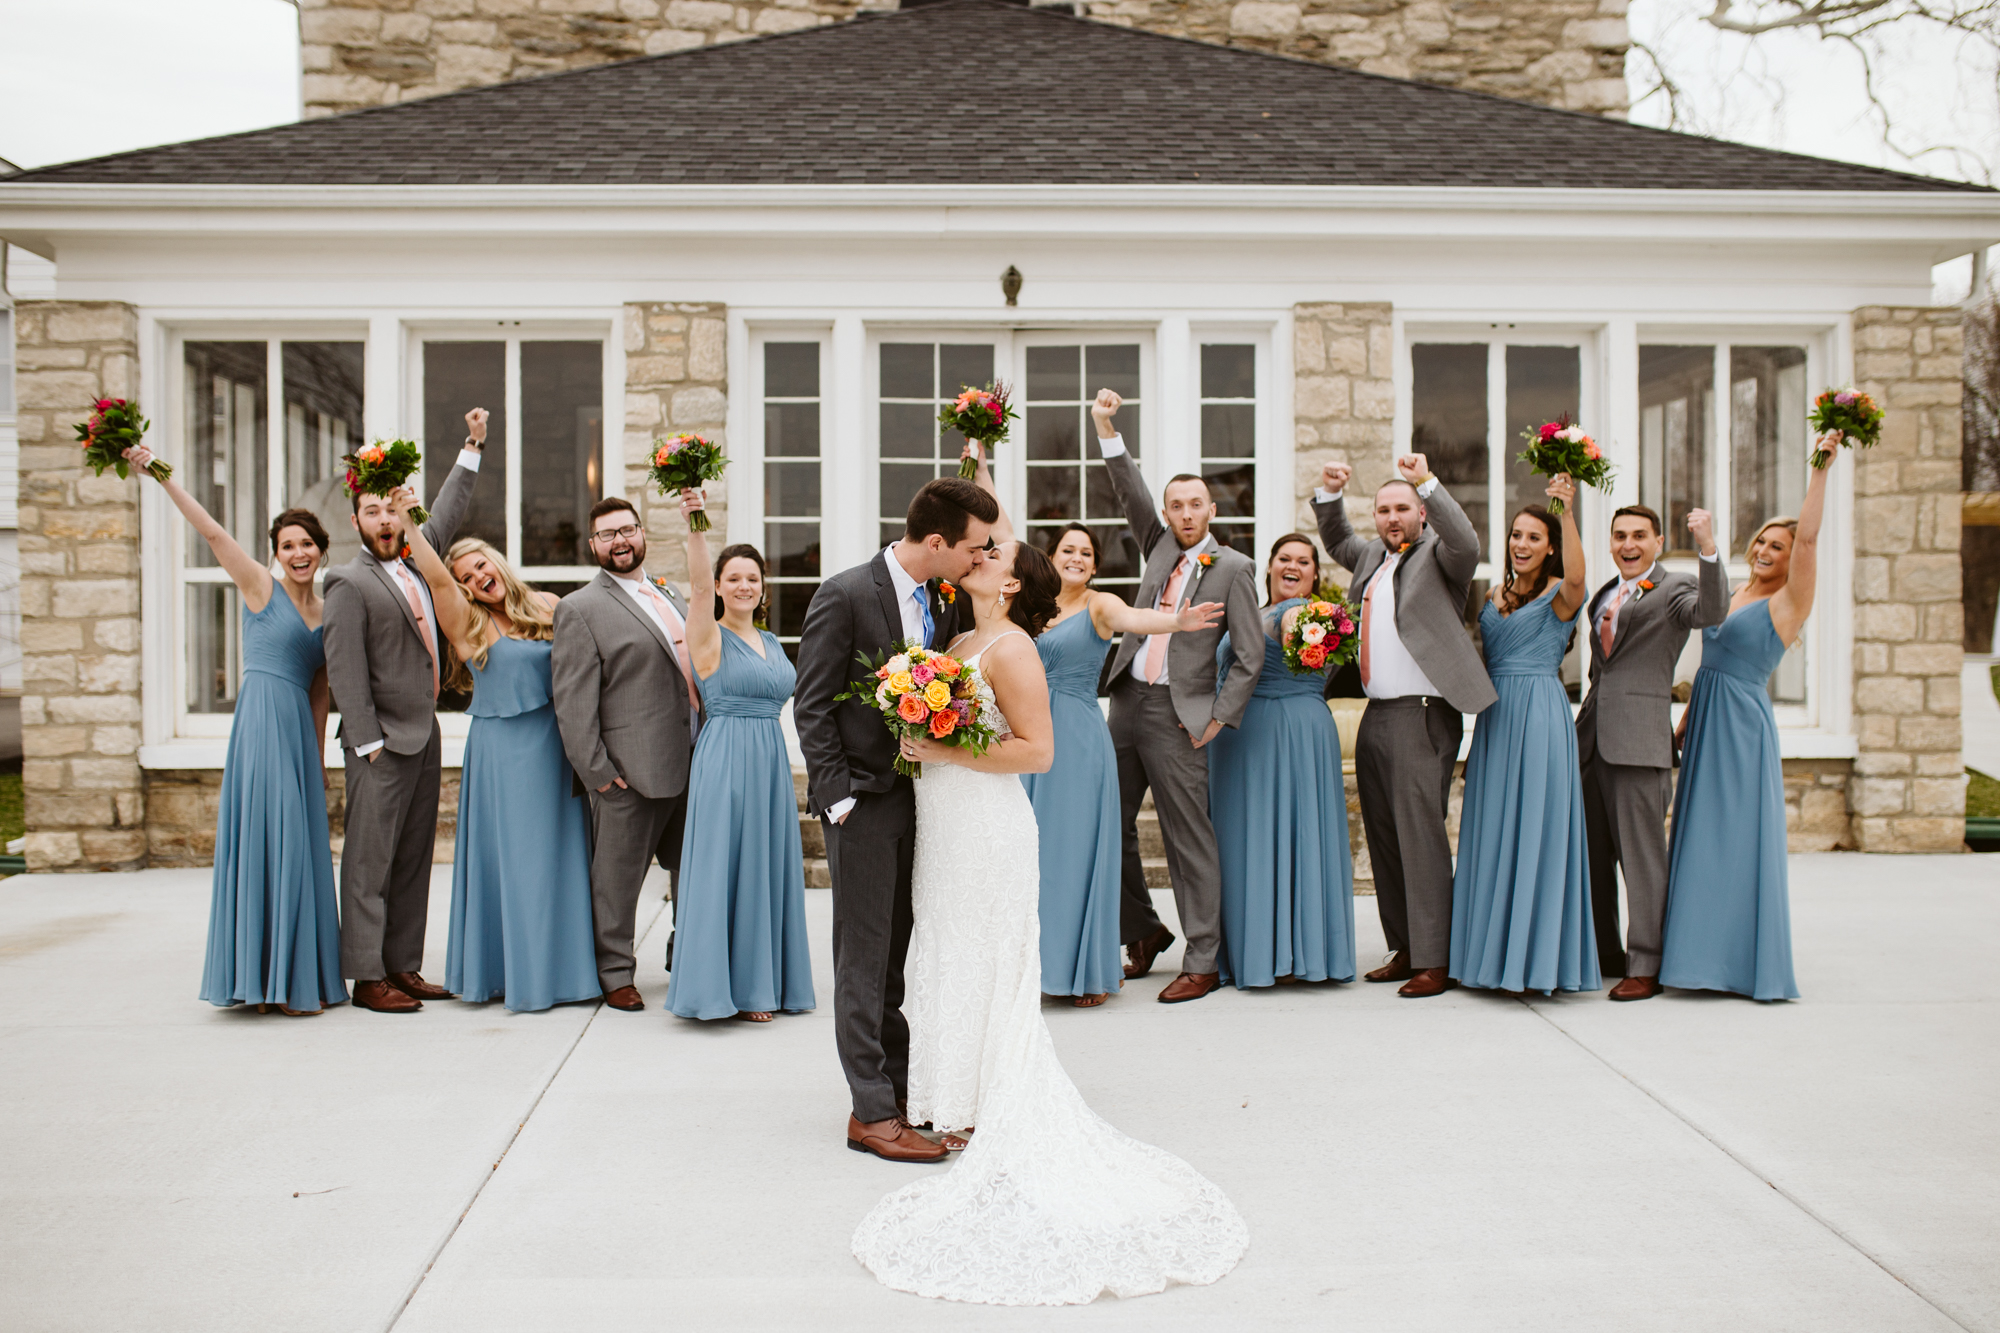 Bridal party portraits at stone house of st charles 